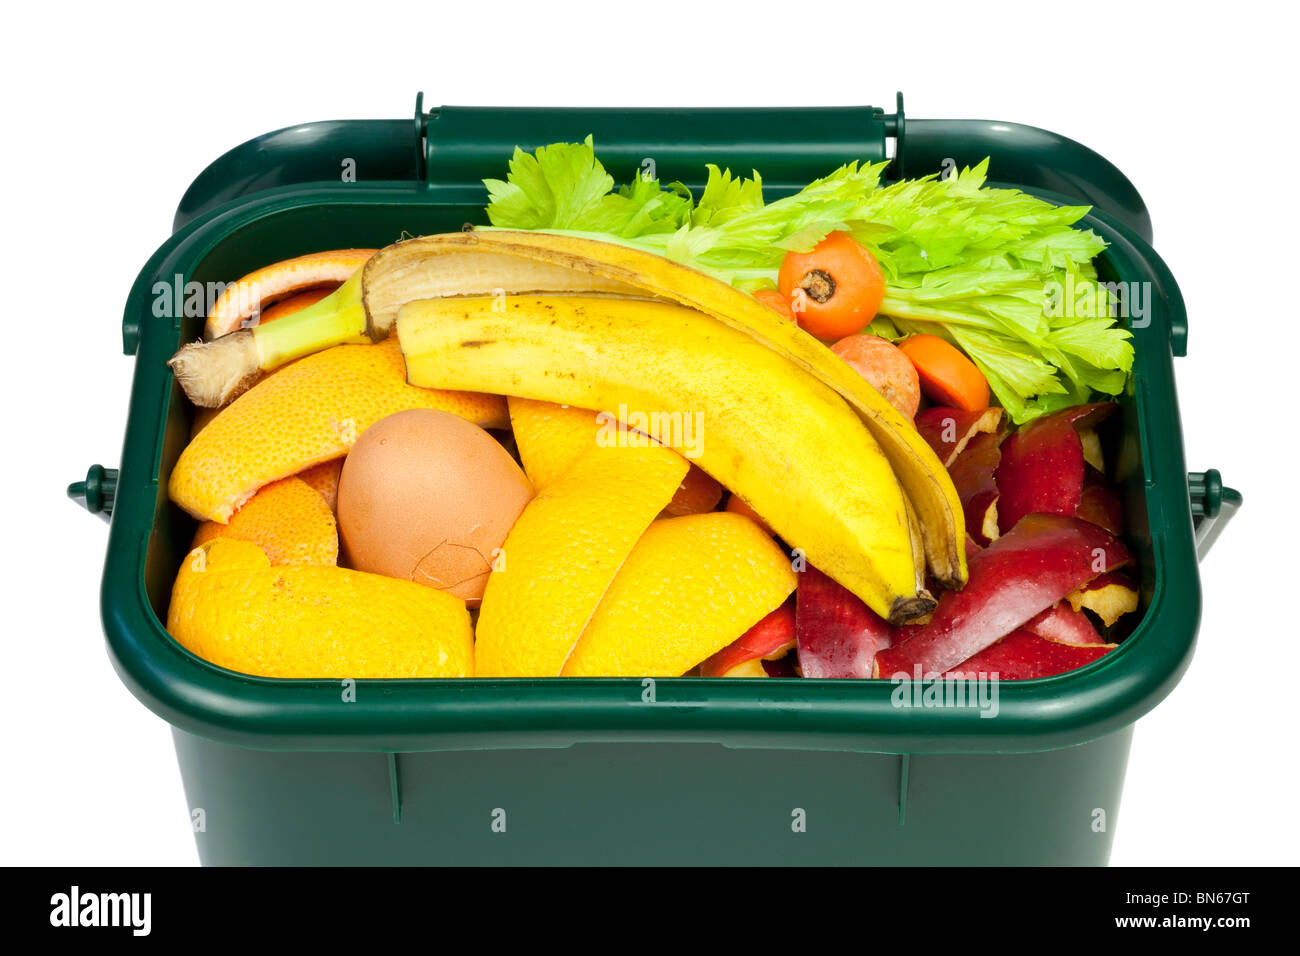 Food waste for composting in domestic recycling waste bin Stock Photo